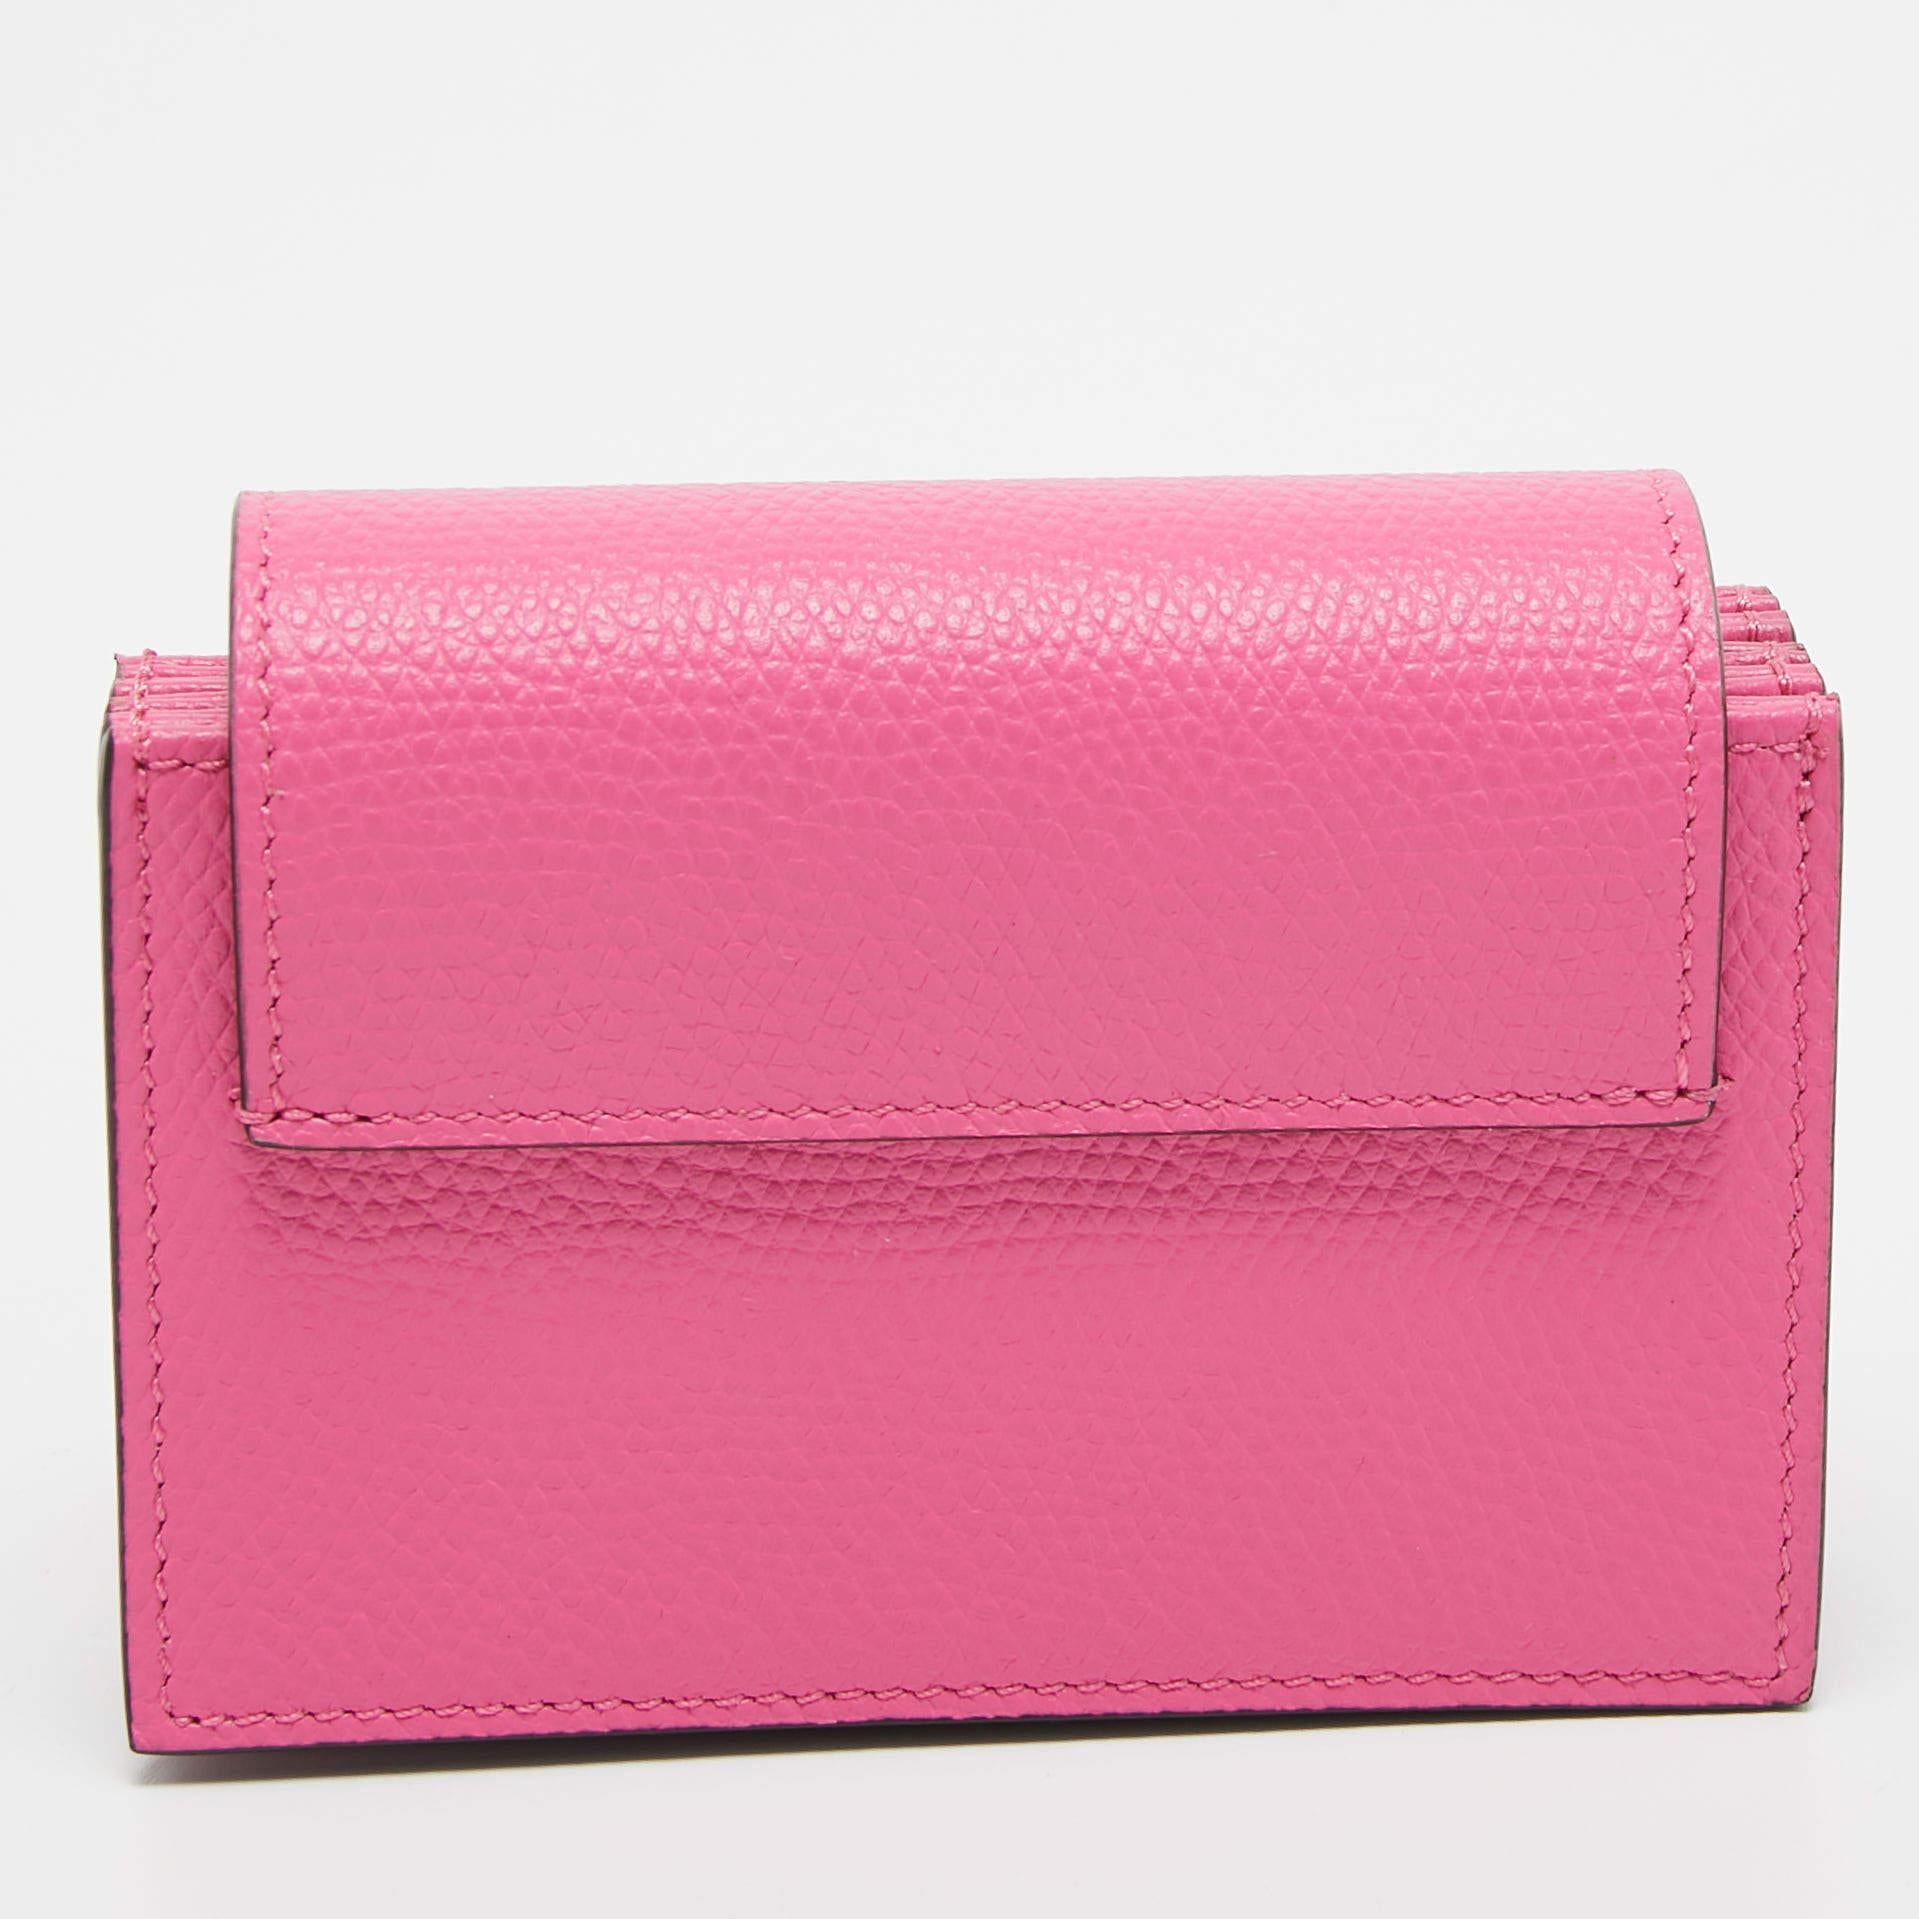 The Valentino card holder is a practical accessory highlighted by the famous VLogo. This compact and stylish piece is perfect for organizing and carrying your cards and cash with a touch of elegance.

